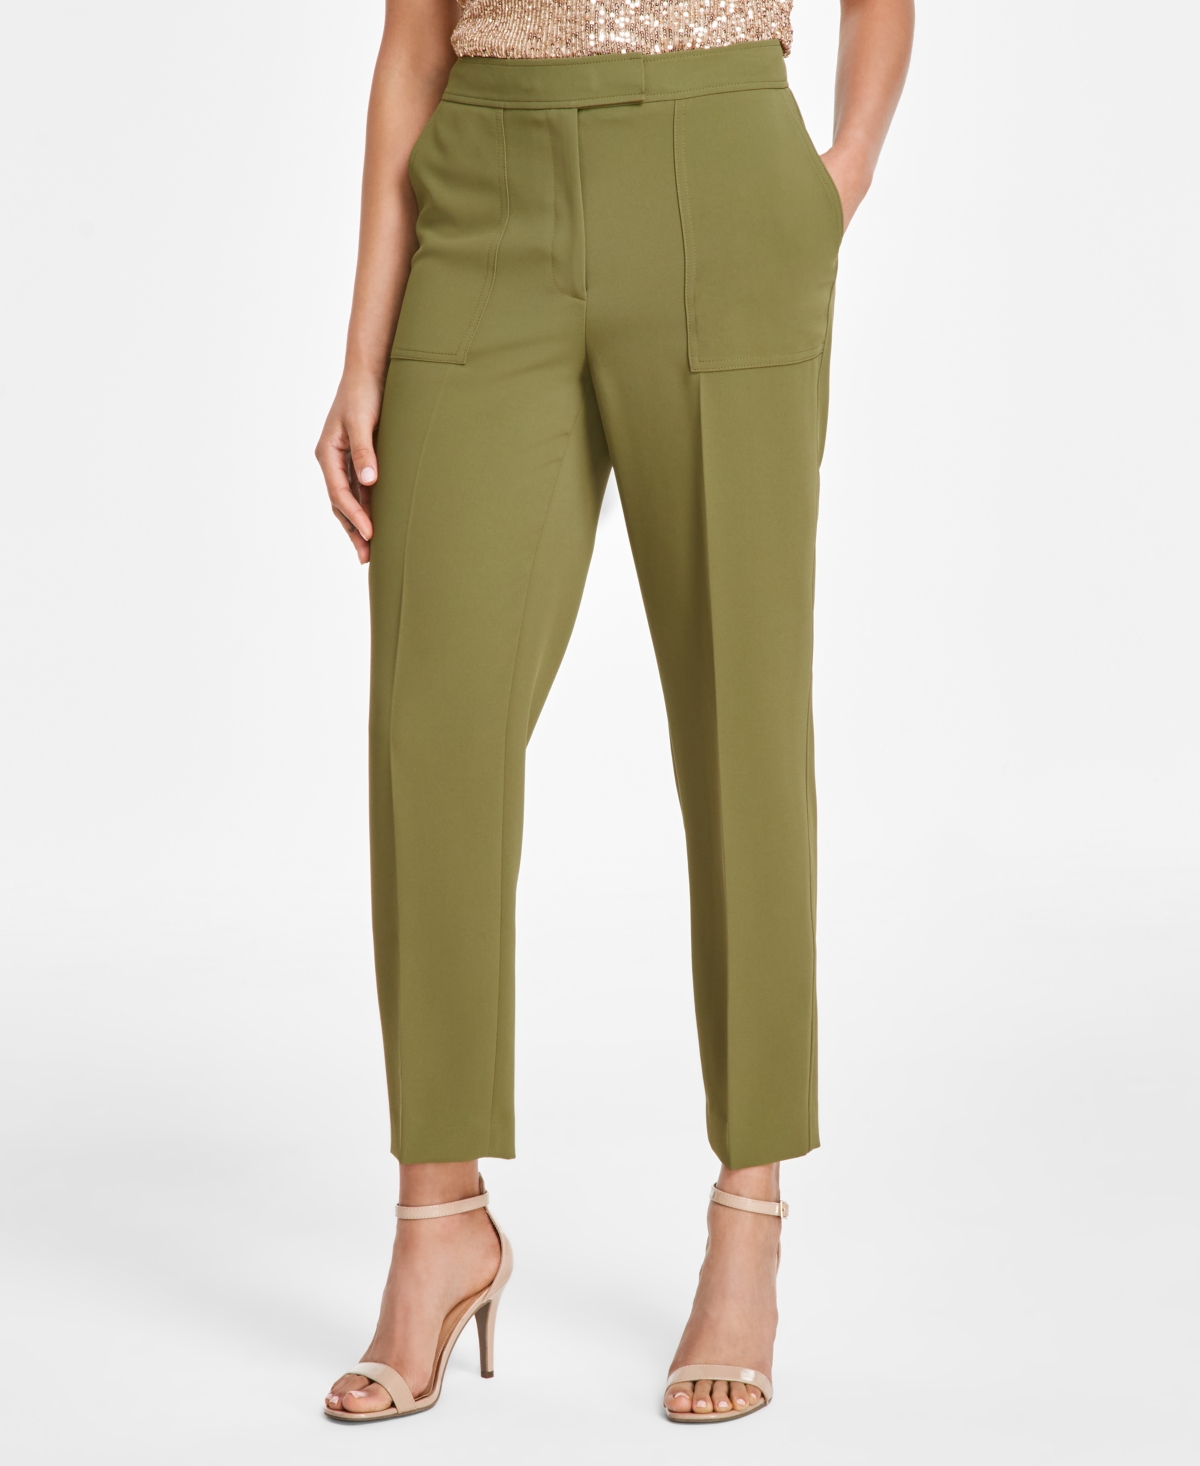 Petite Twill High Rise Fly-Front Ankle Pants - Bay Leaf